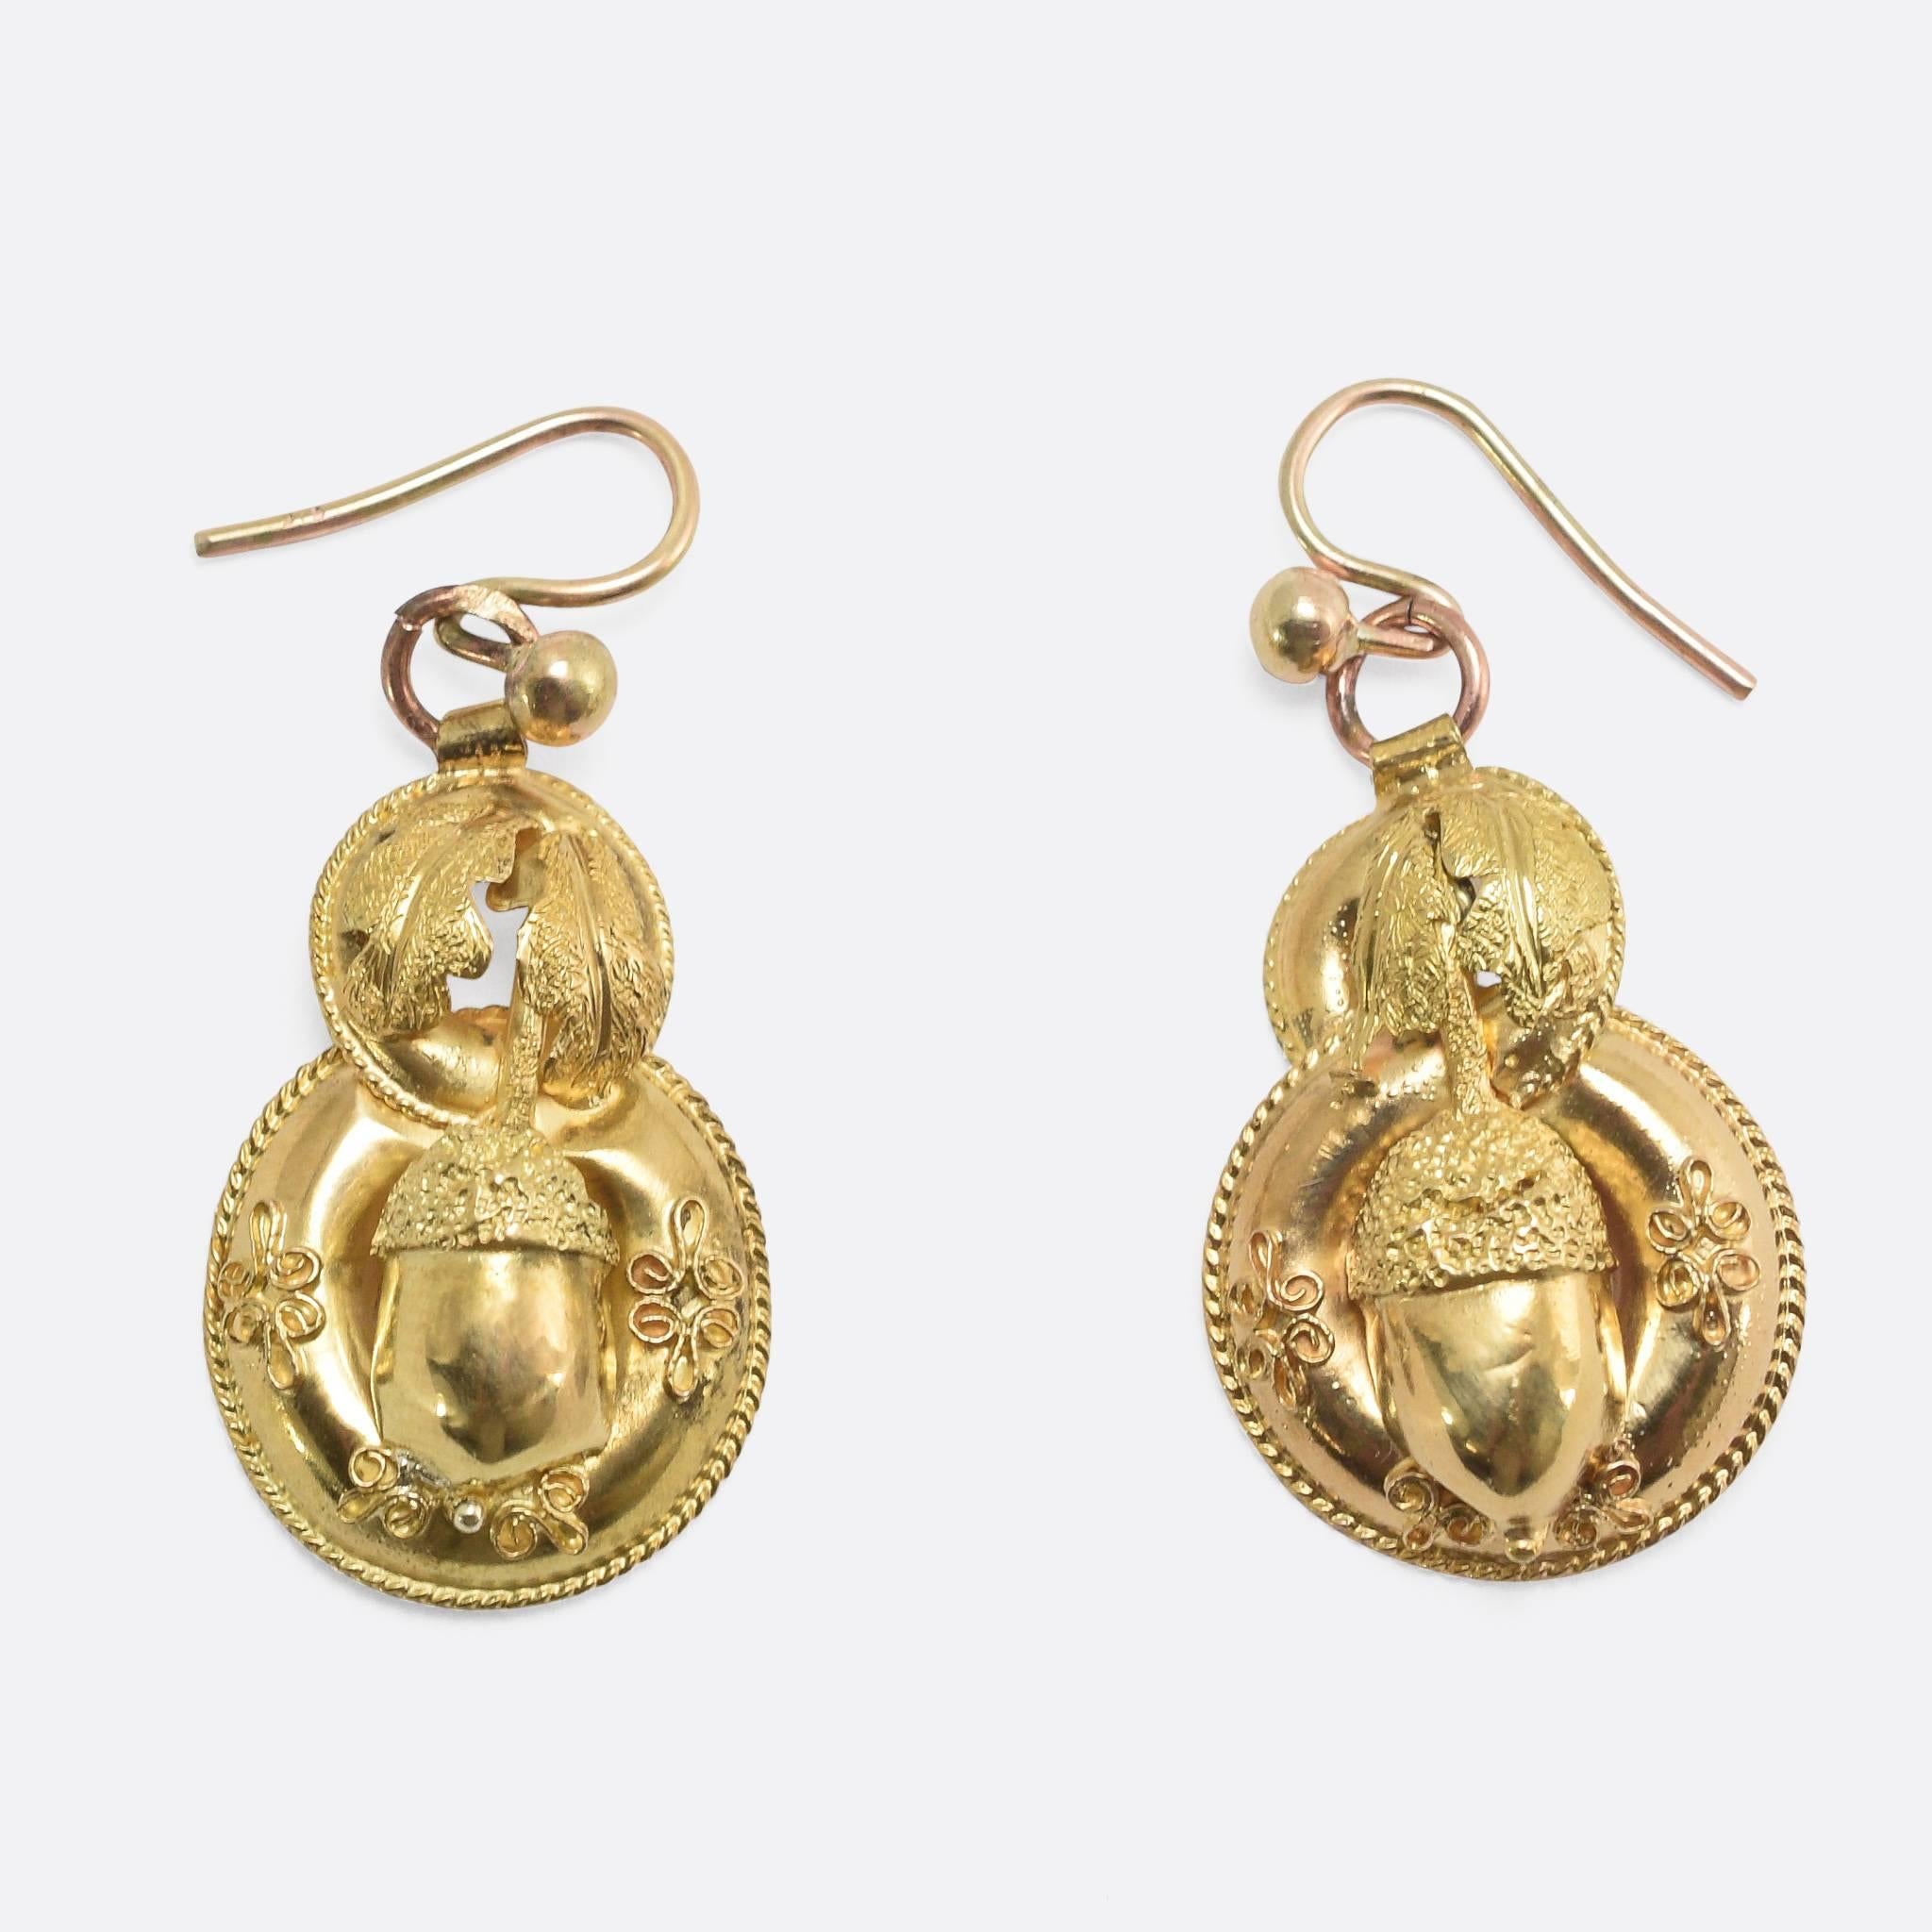 This beautiful pair of earrings is modelled in 15k yellow gold. The lightweight design is in the Etruscan Revival style, with applied rope-work detailing and an acorn and oak leaves on each. An attractive pair, in remarkably good condition